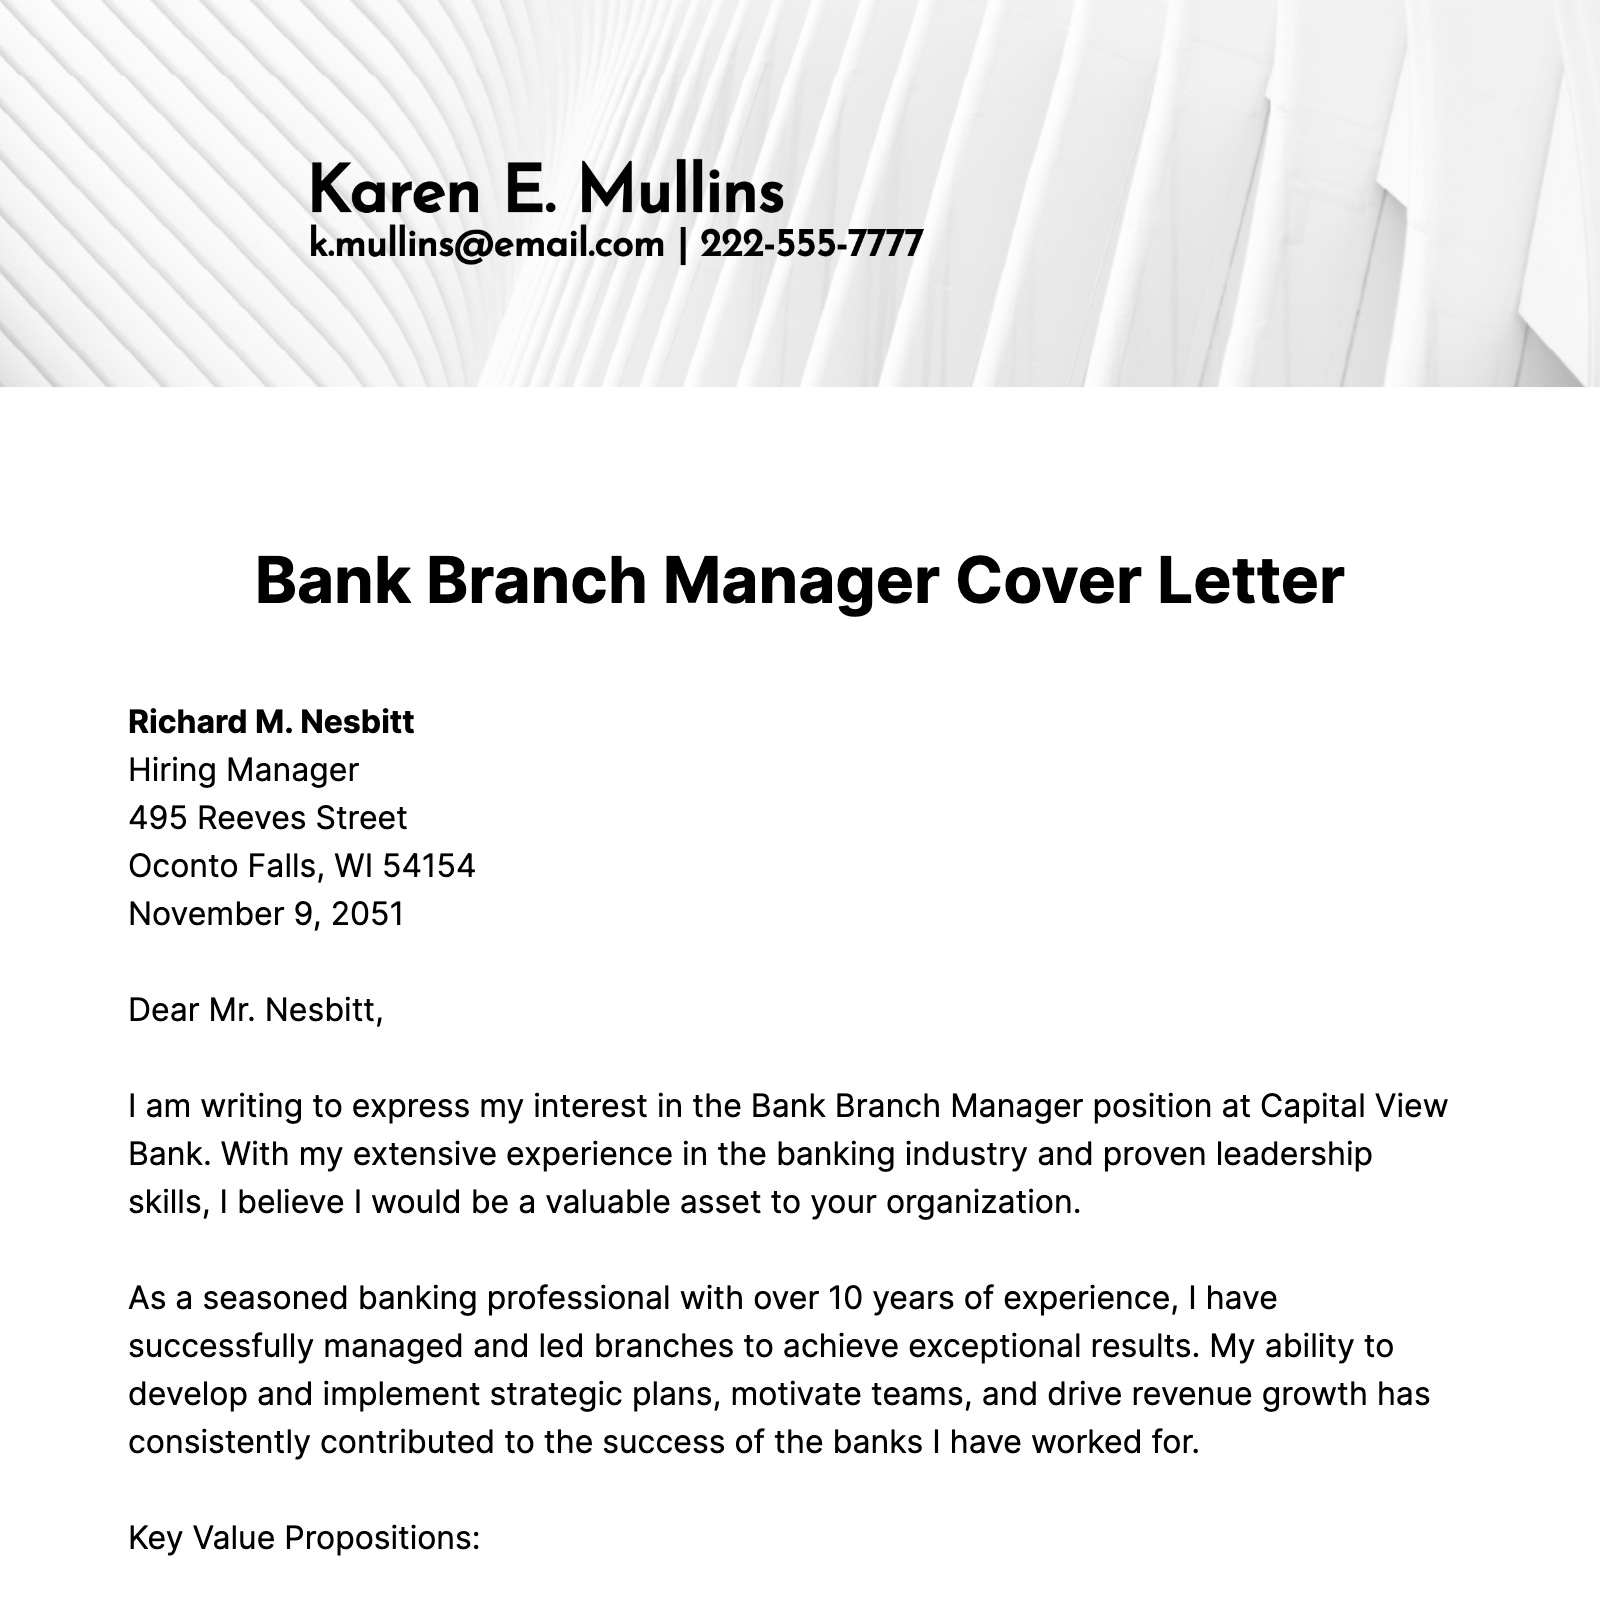 Bank Branch Manager Cover Letter  Template